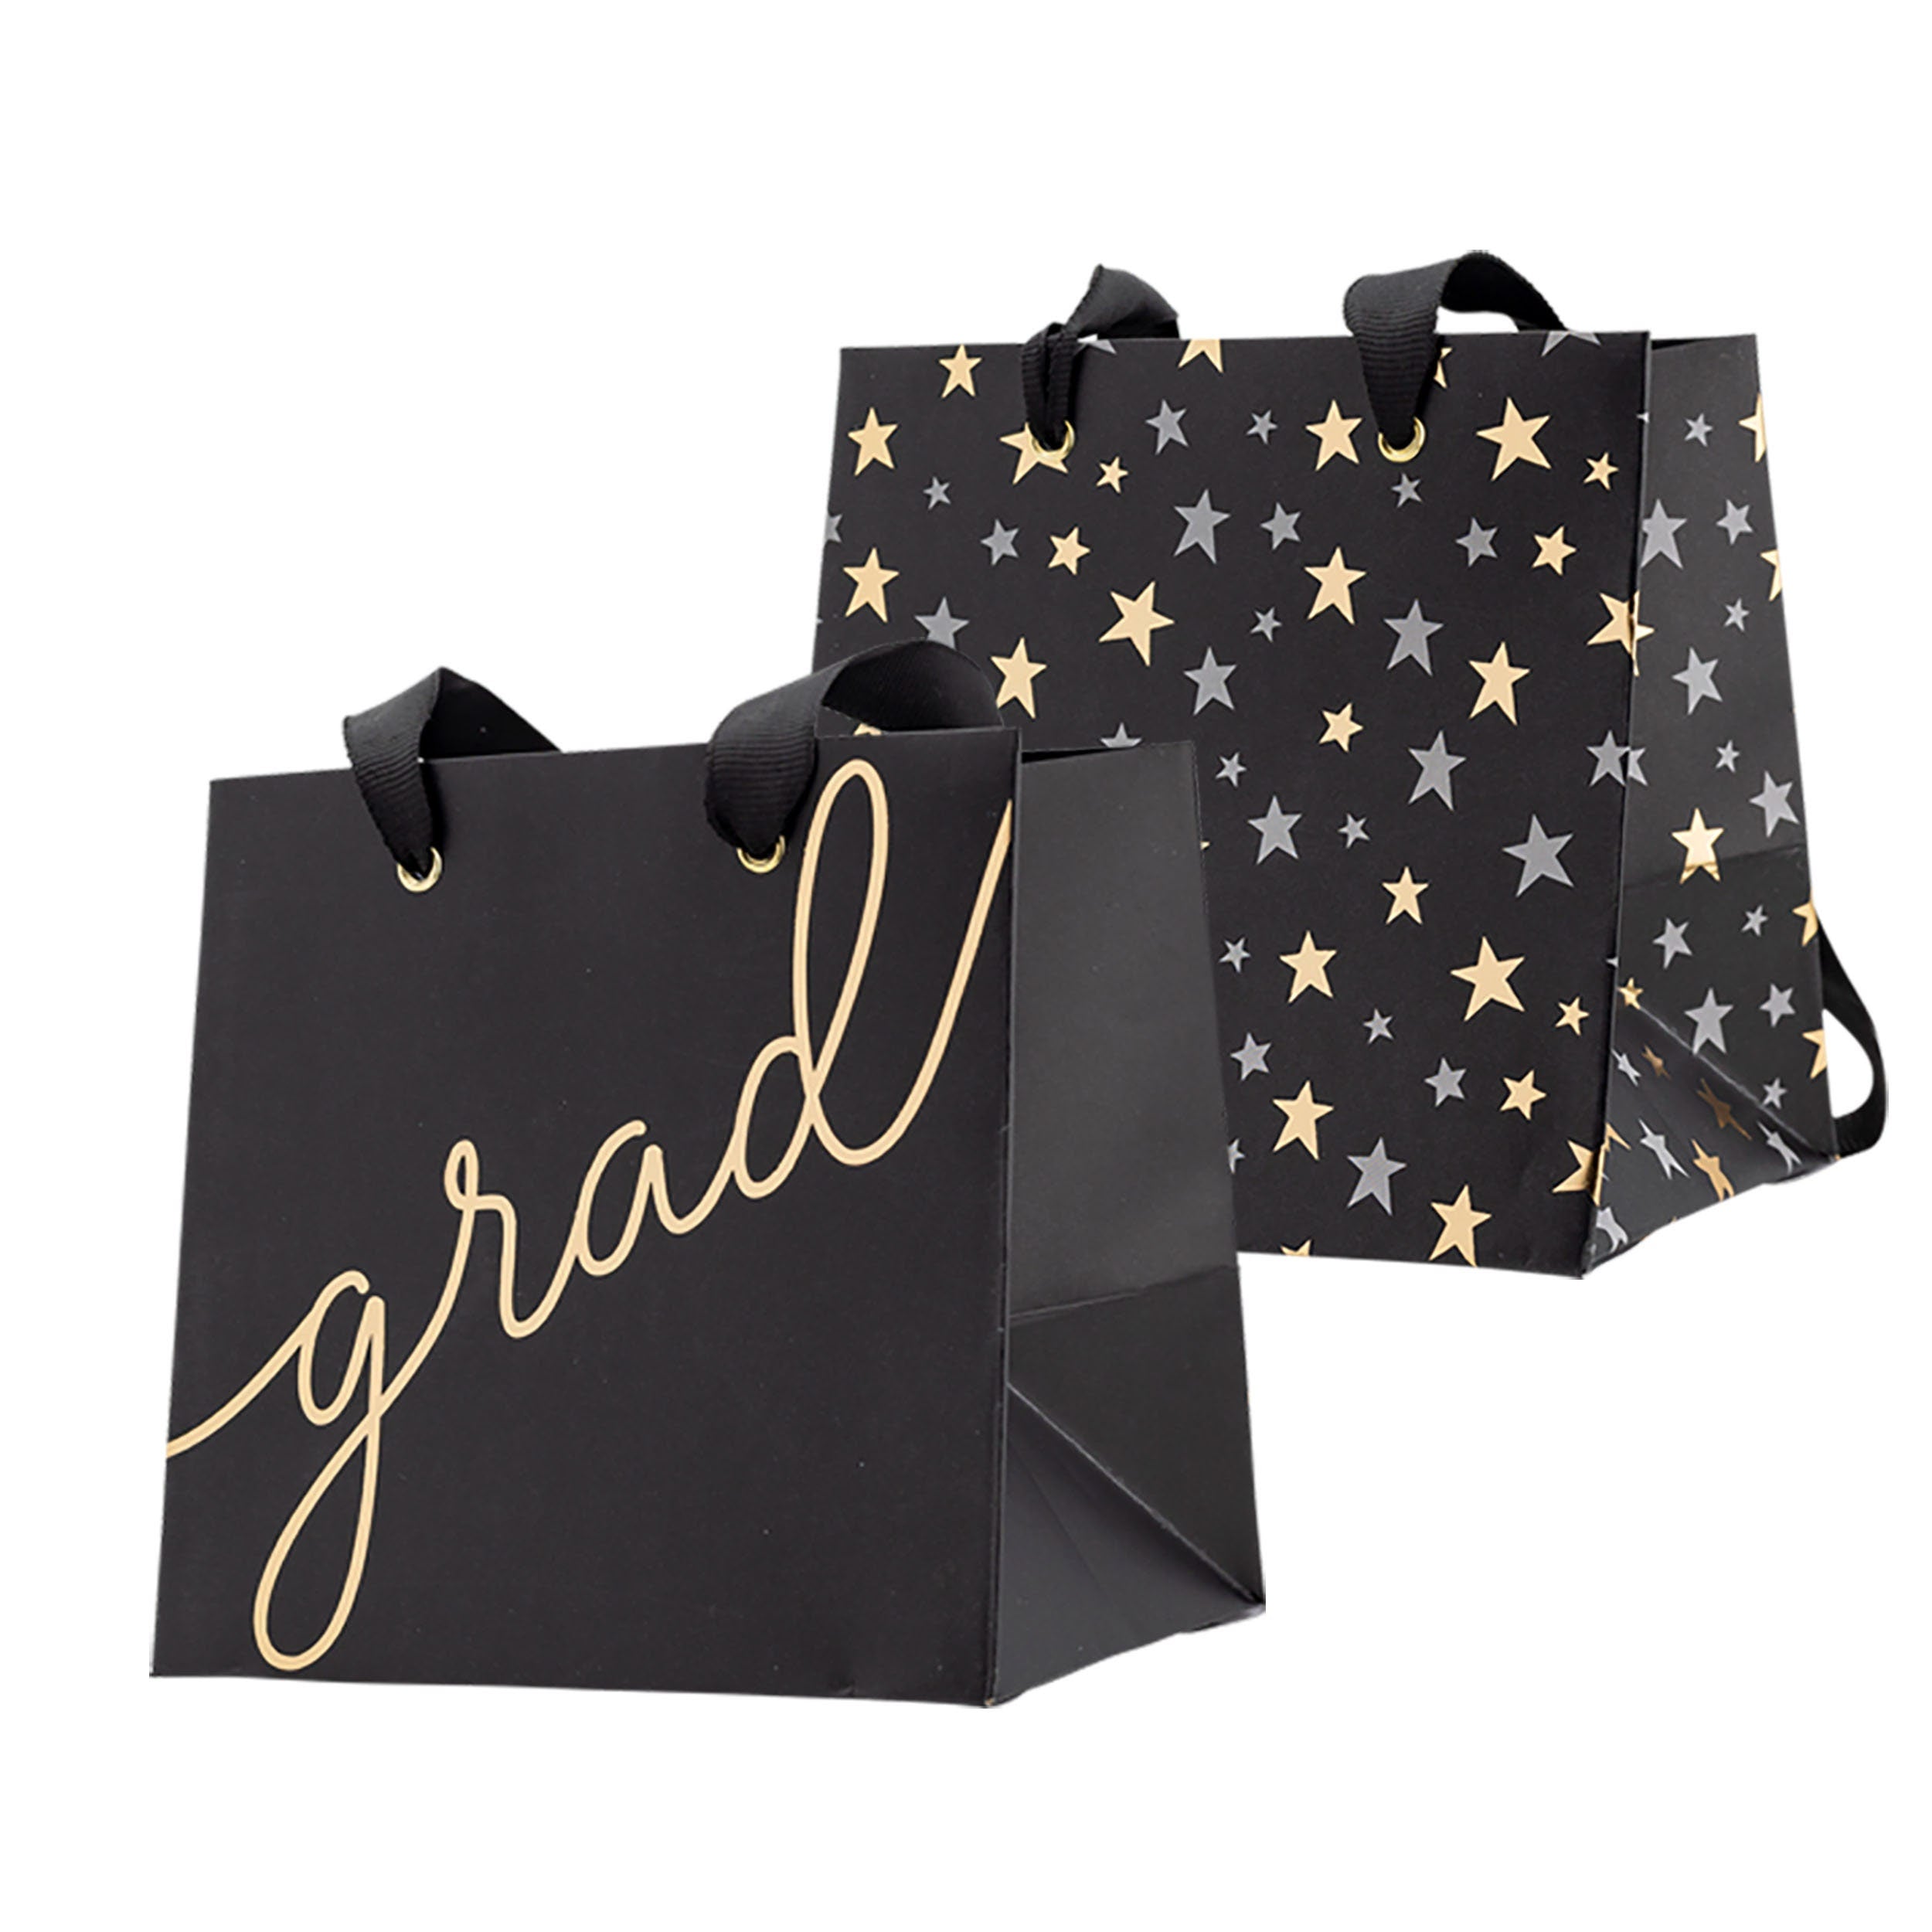 Graduation Gift Bags in Black, Two Designs, One says grad in gold foil script and the other are tiny stars.